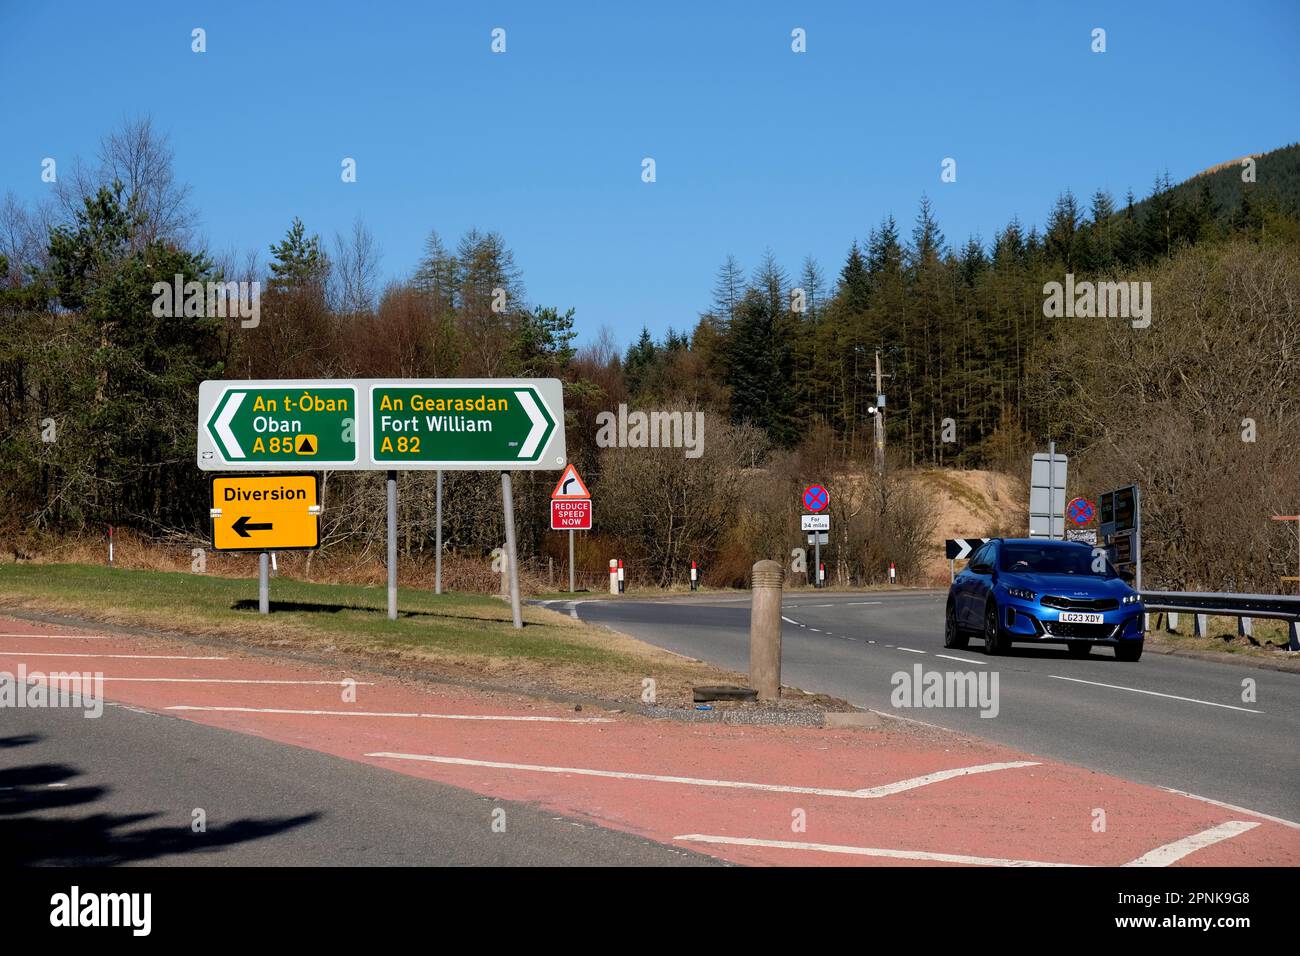 Clear blue skies and bright sunshine at Tyndrum, seen at the junction for the A82 road to Fort William and the A85 road to Oban, Tyndrum, Scotland Stock Photo